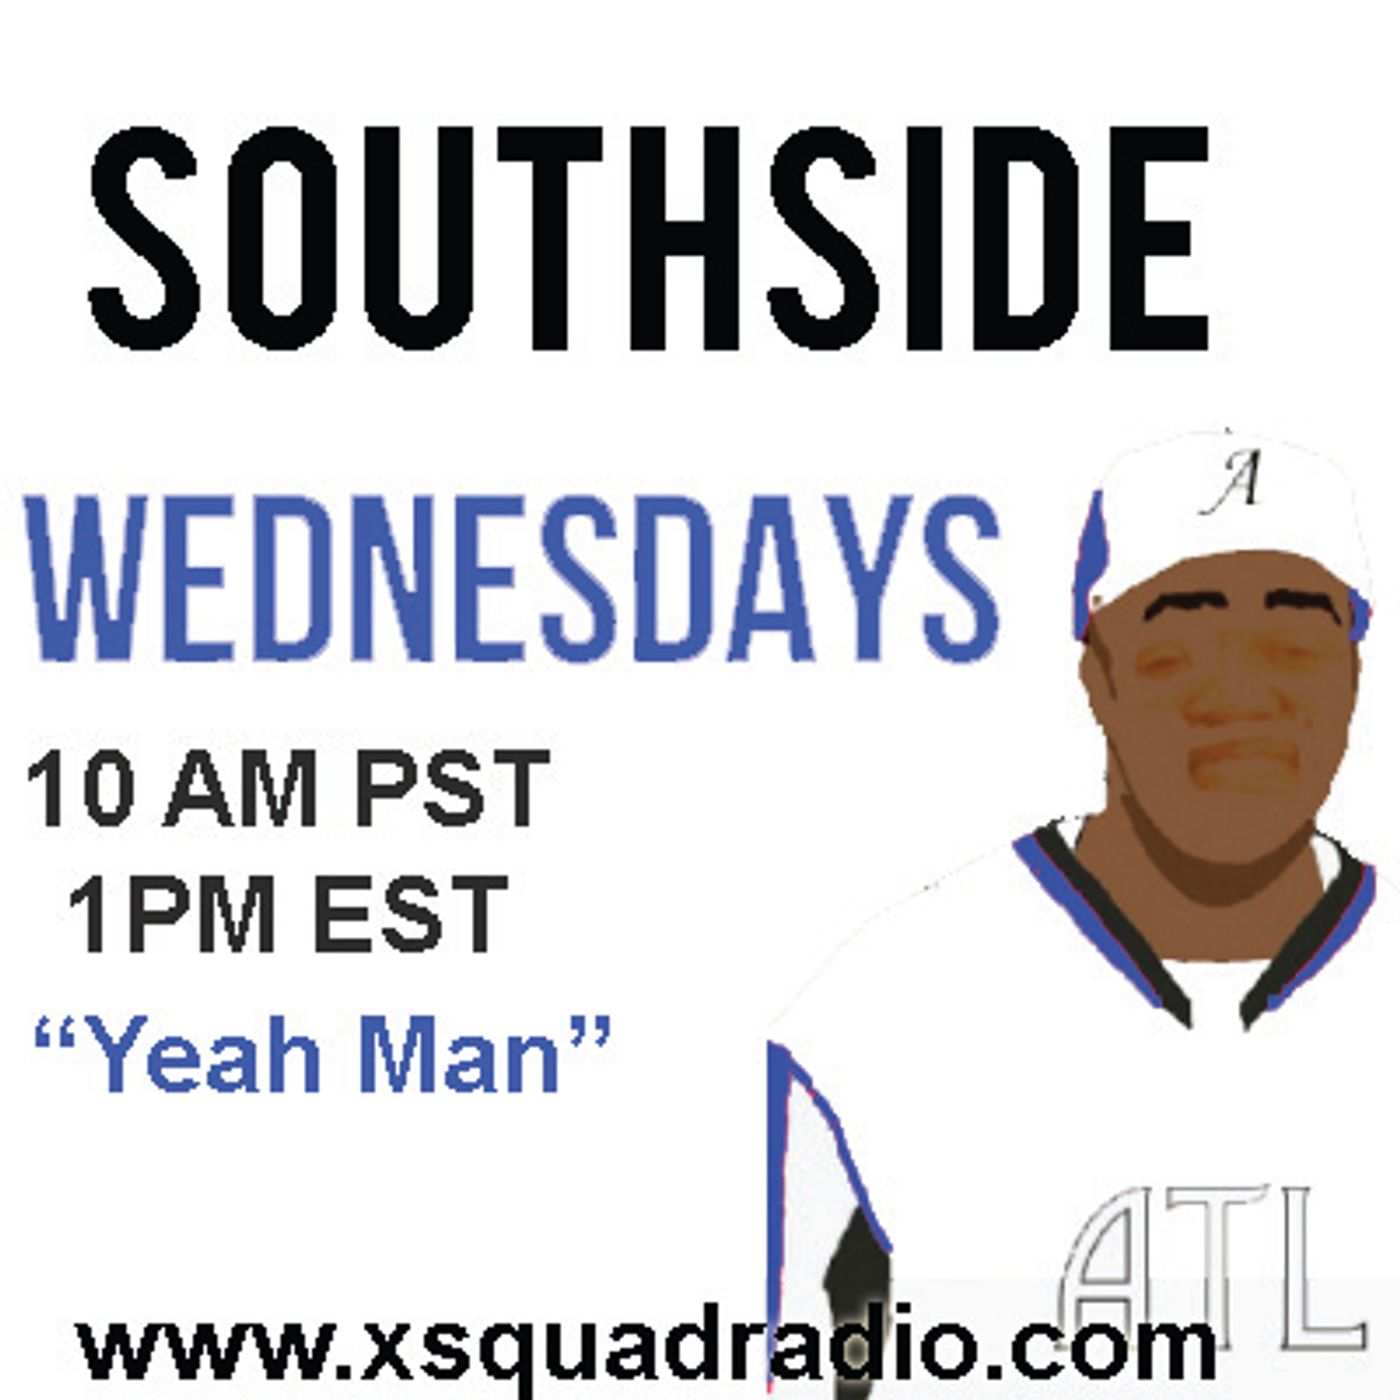 Southside Wednesday with The Jammin' It With Kysii Show (KeyGratest)